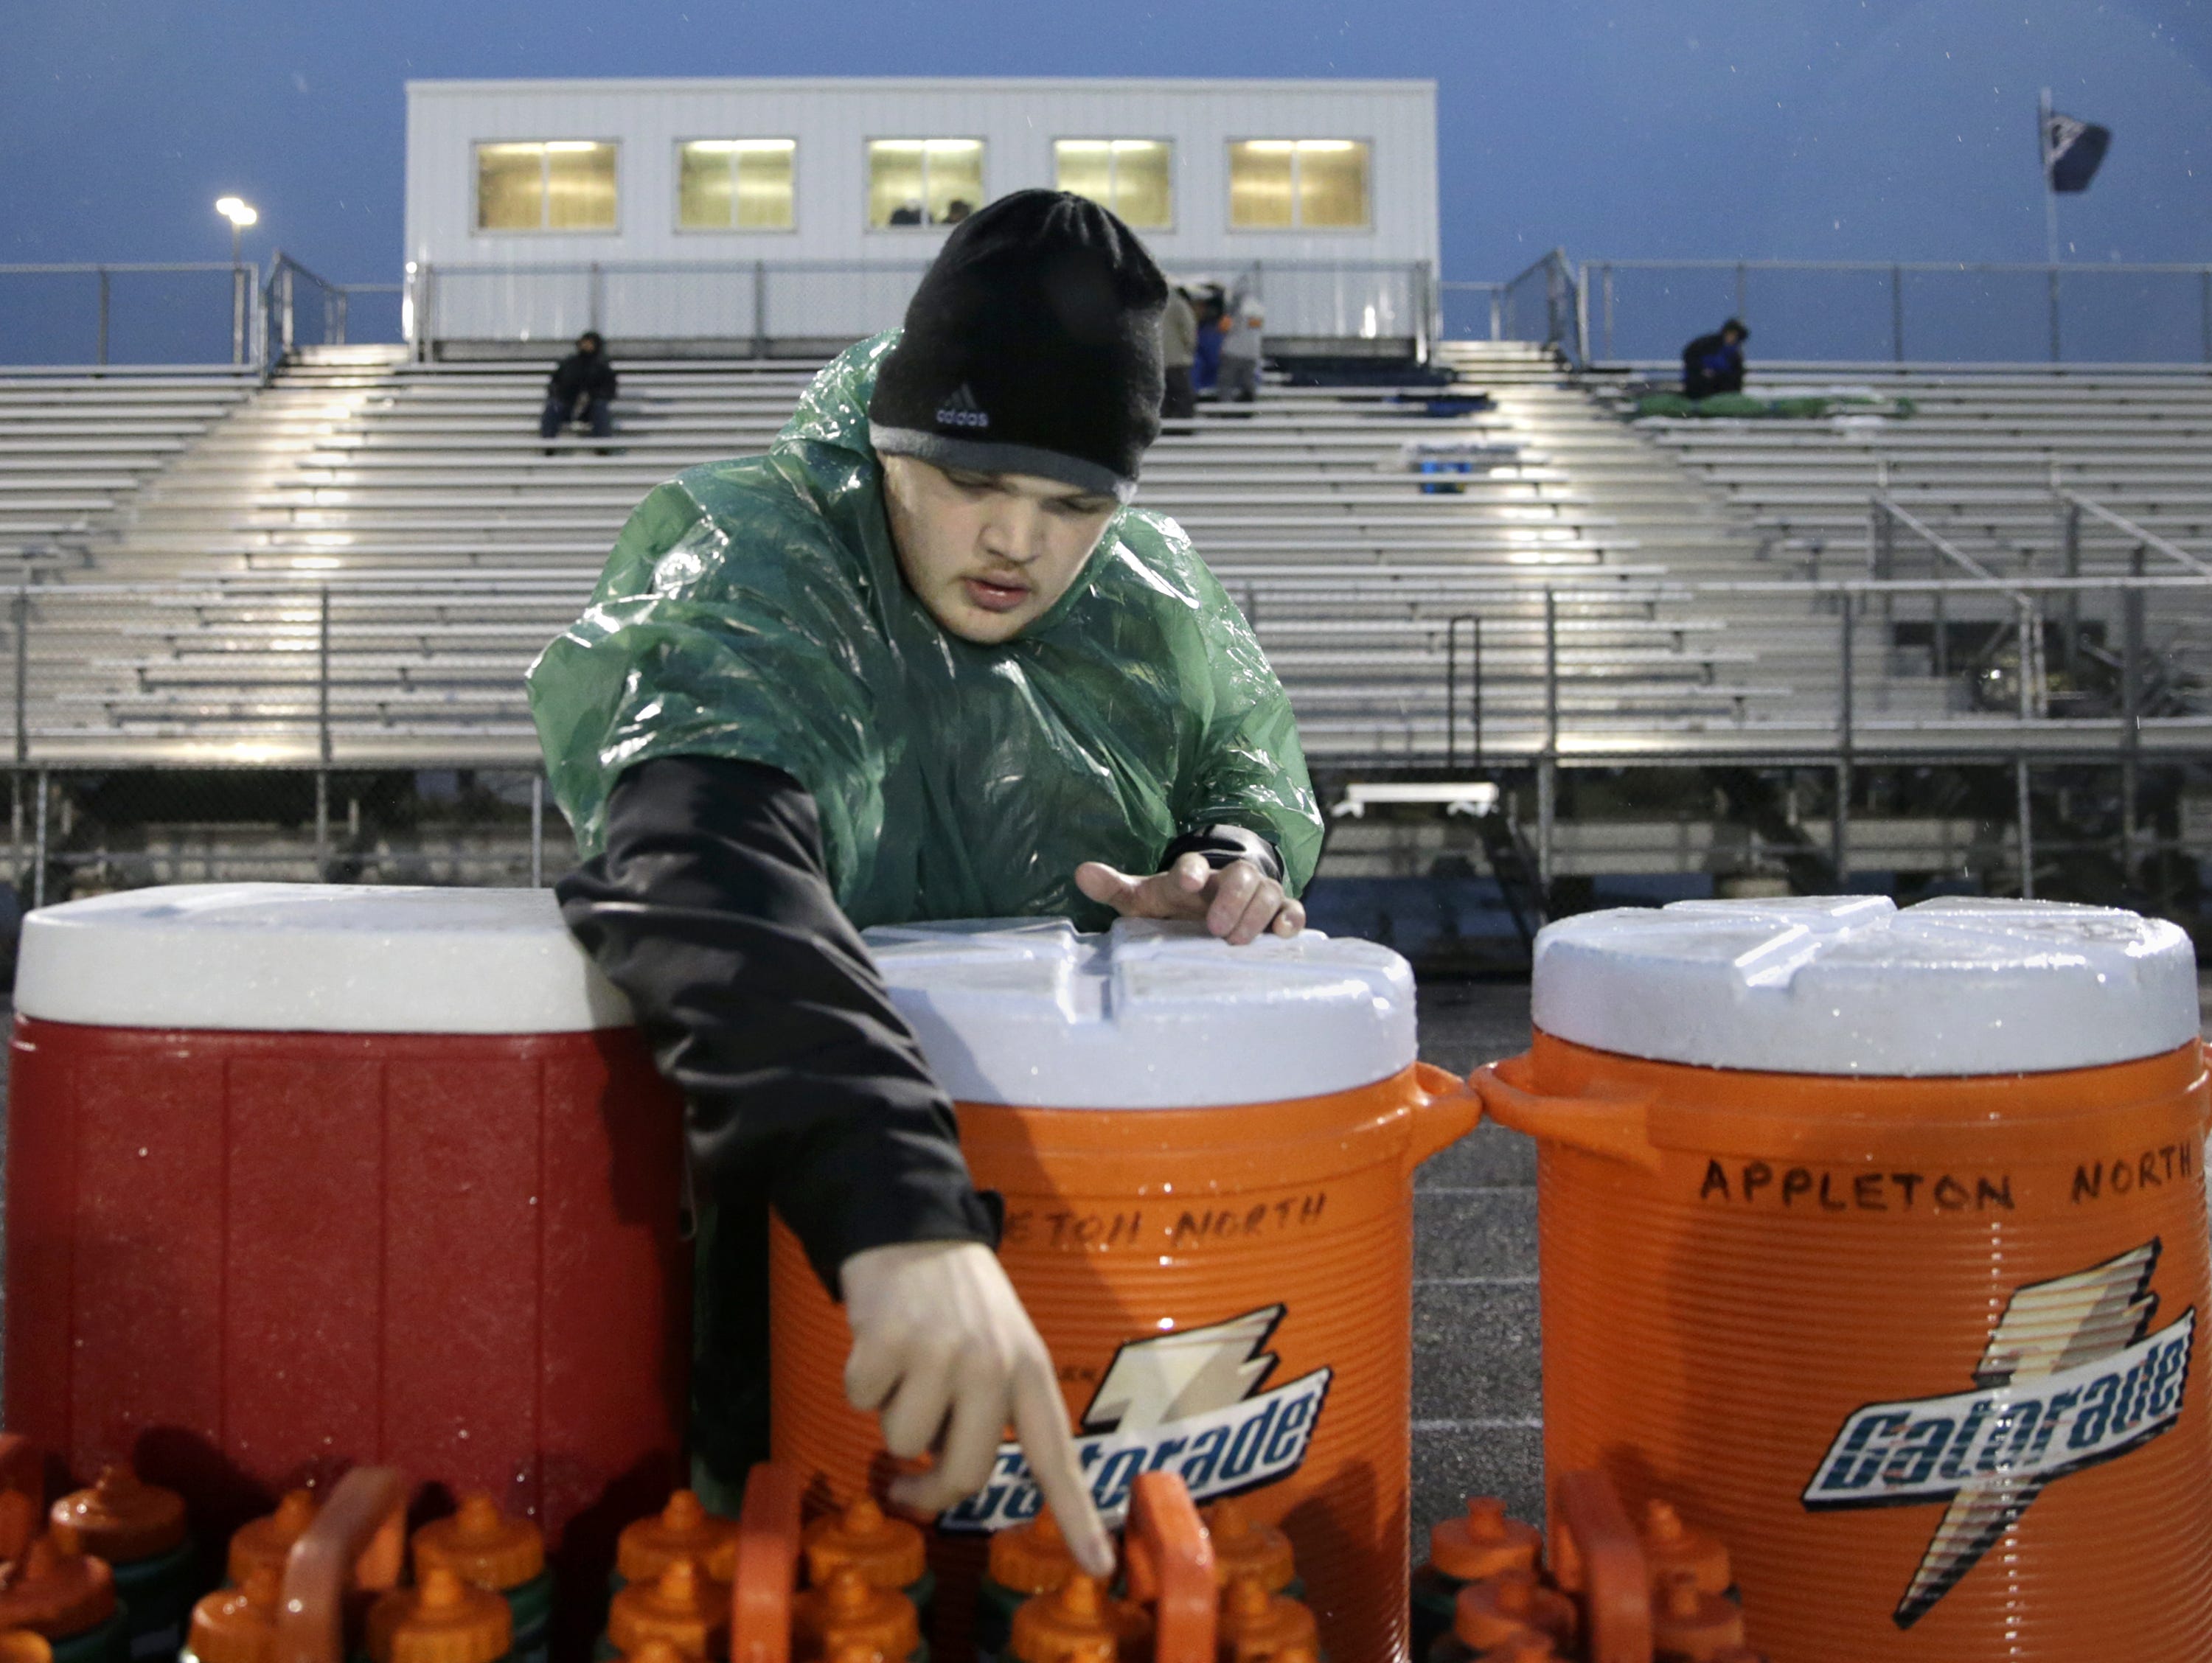 Will Carroll, who has Asperger syndrome, has been working on the sidelines as a manager for Appleton North High School's football team for four years.